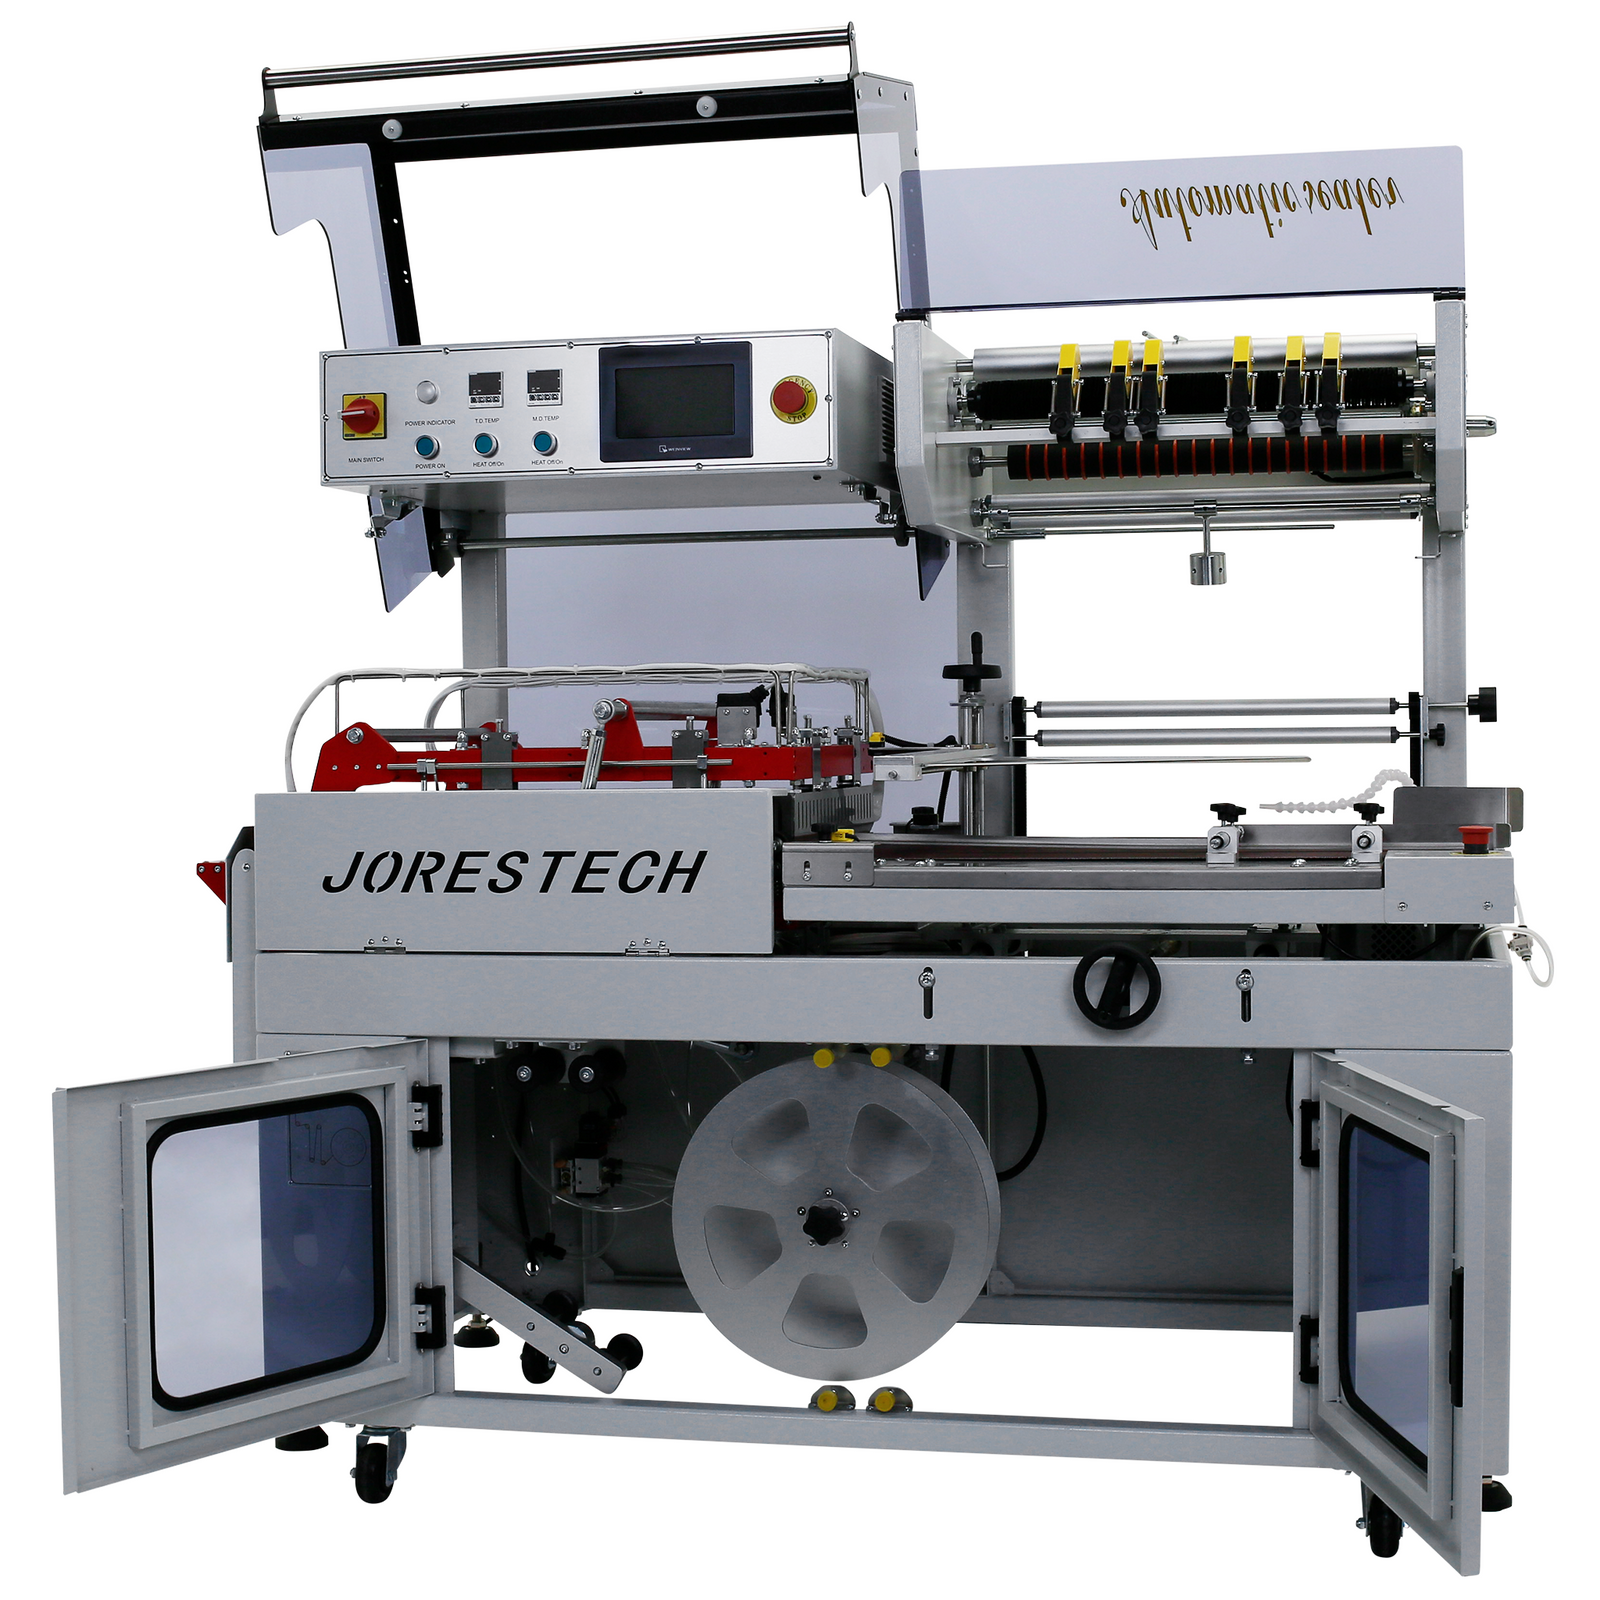  Automatic L Bar Film Sealer with the doors compartment open showing internal mechanisms to thread the shrink film.